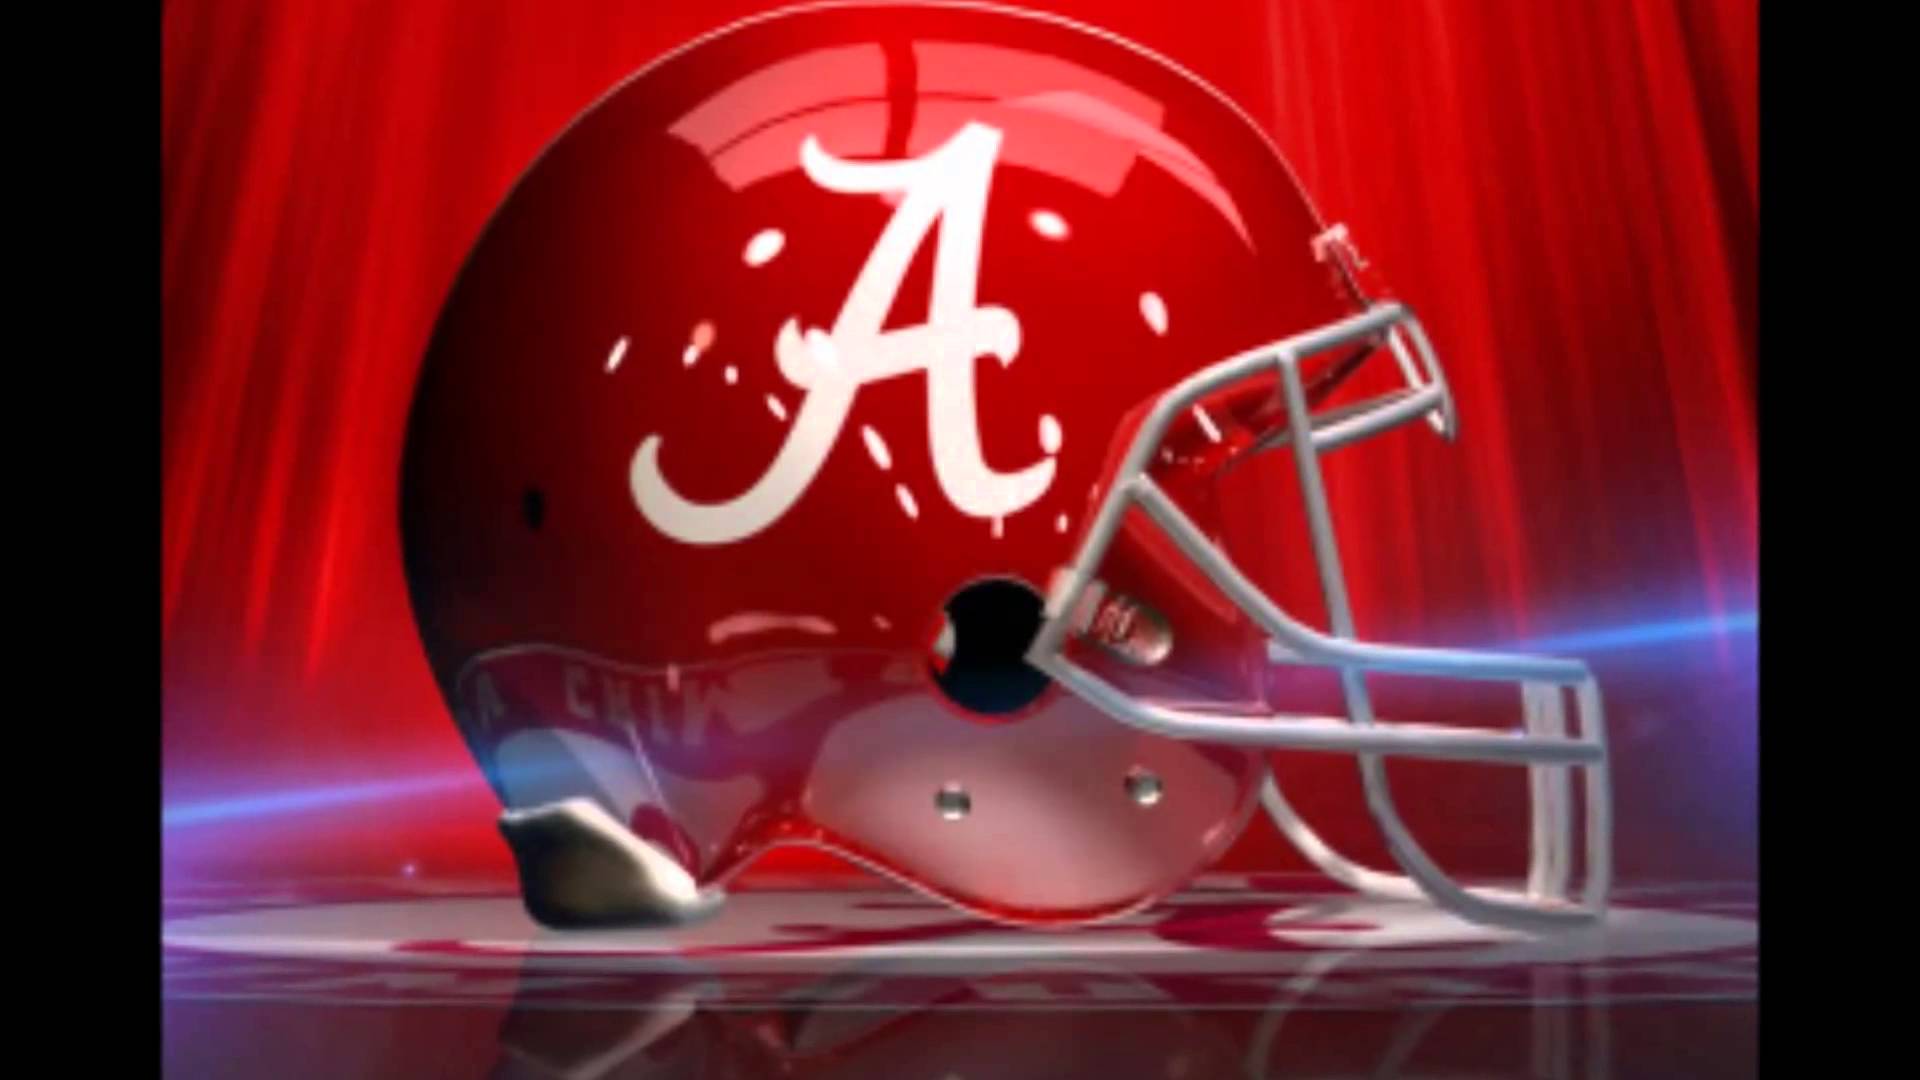 Roll Tide Roll Wallpapers Wallpaper Cave